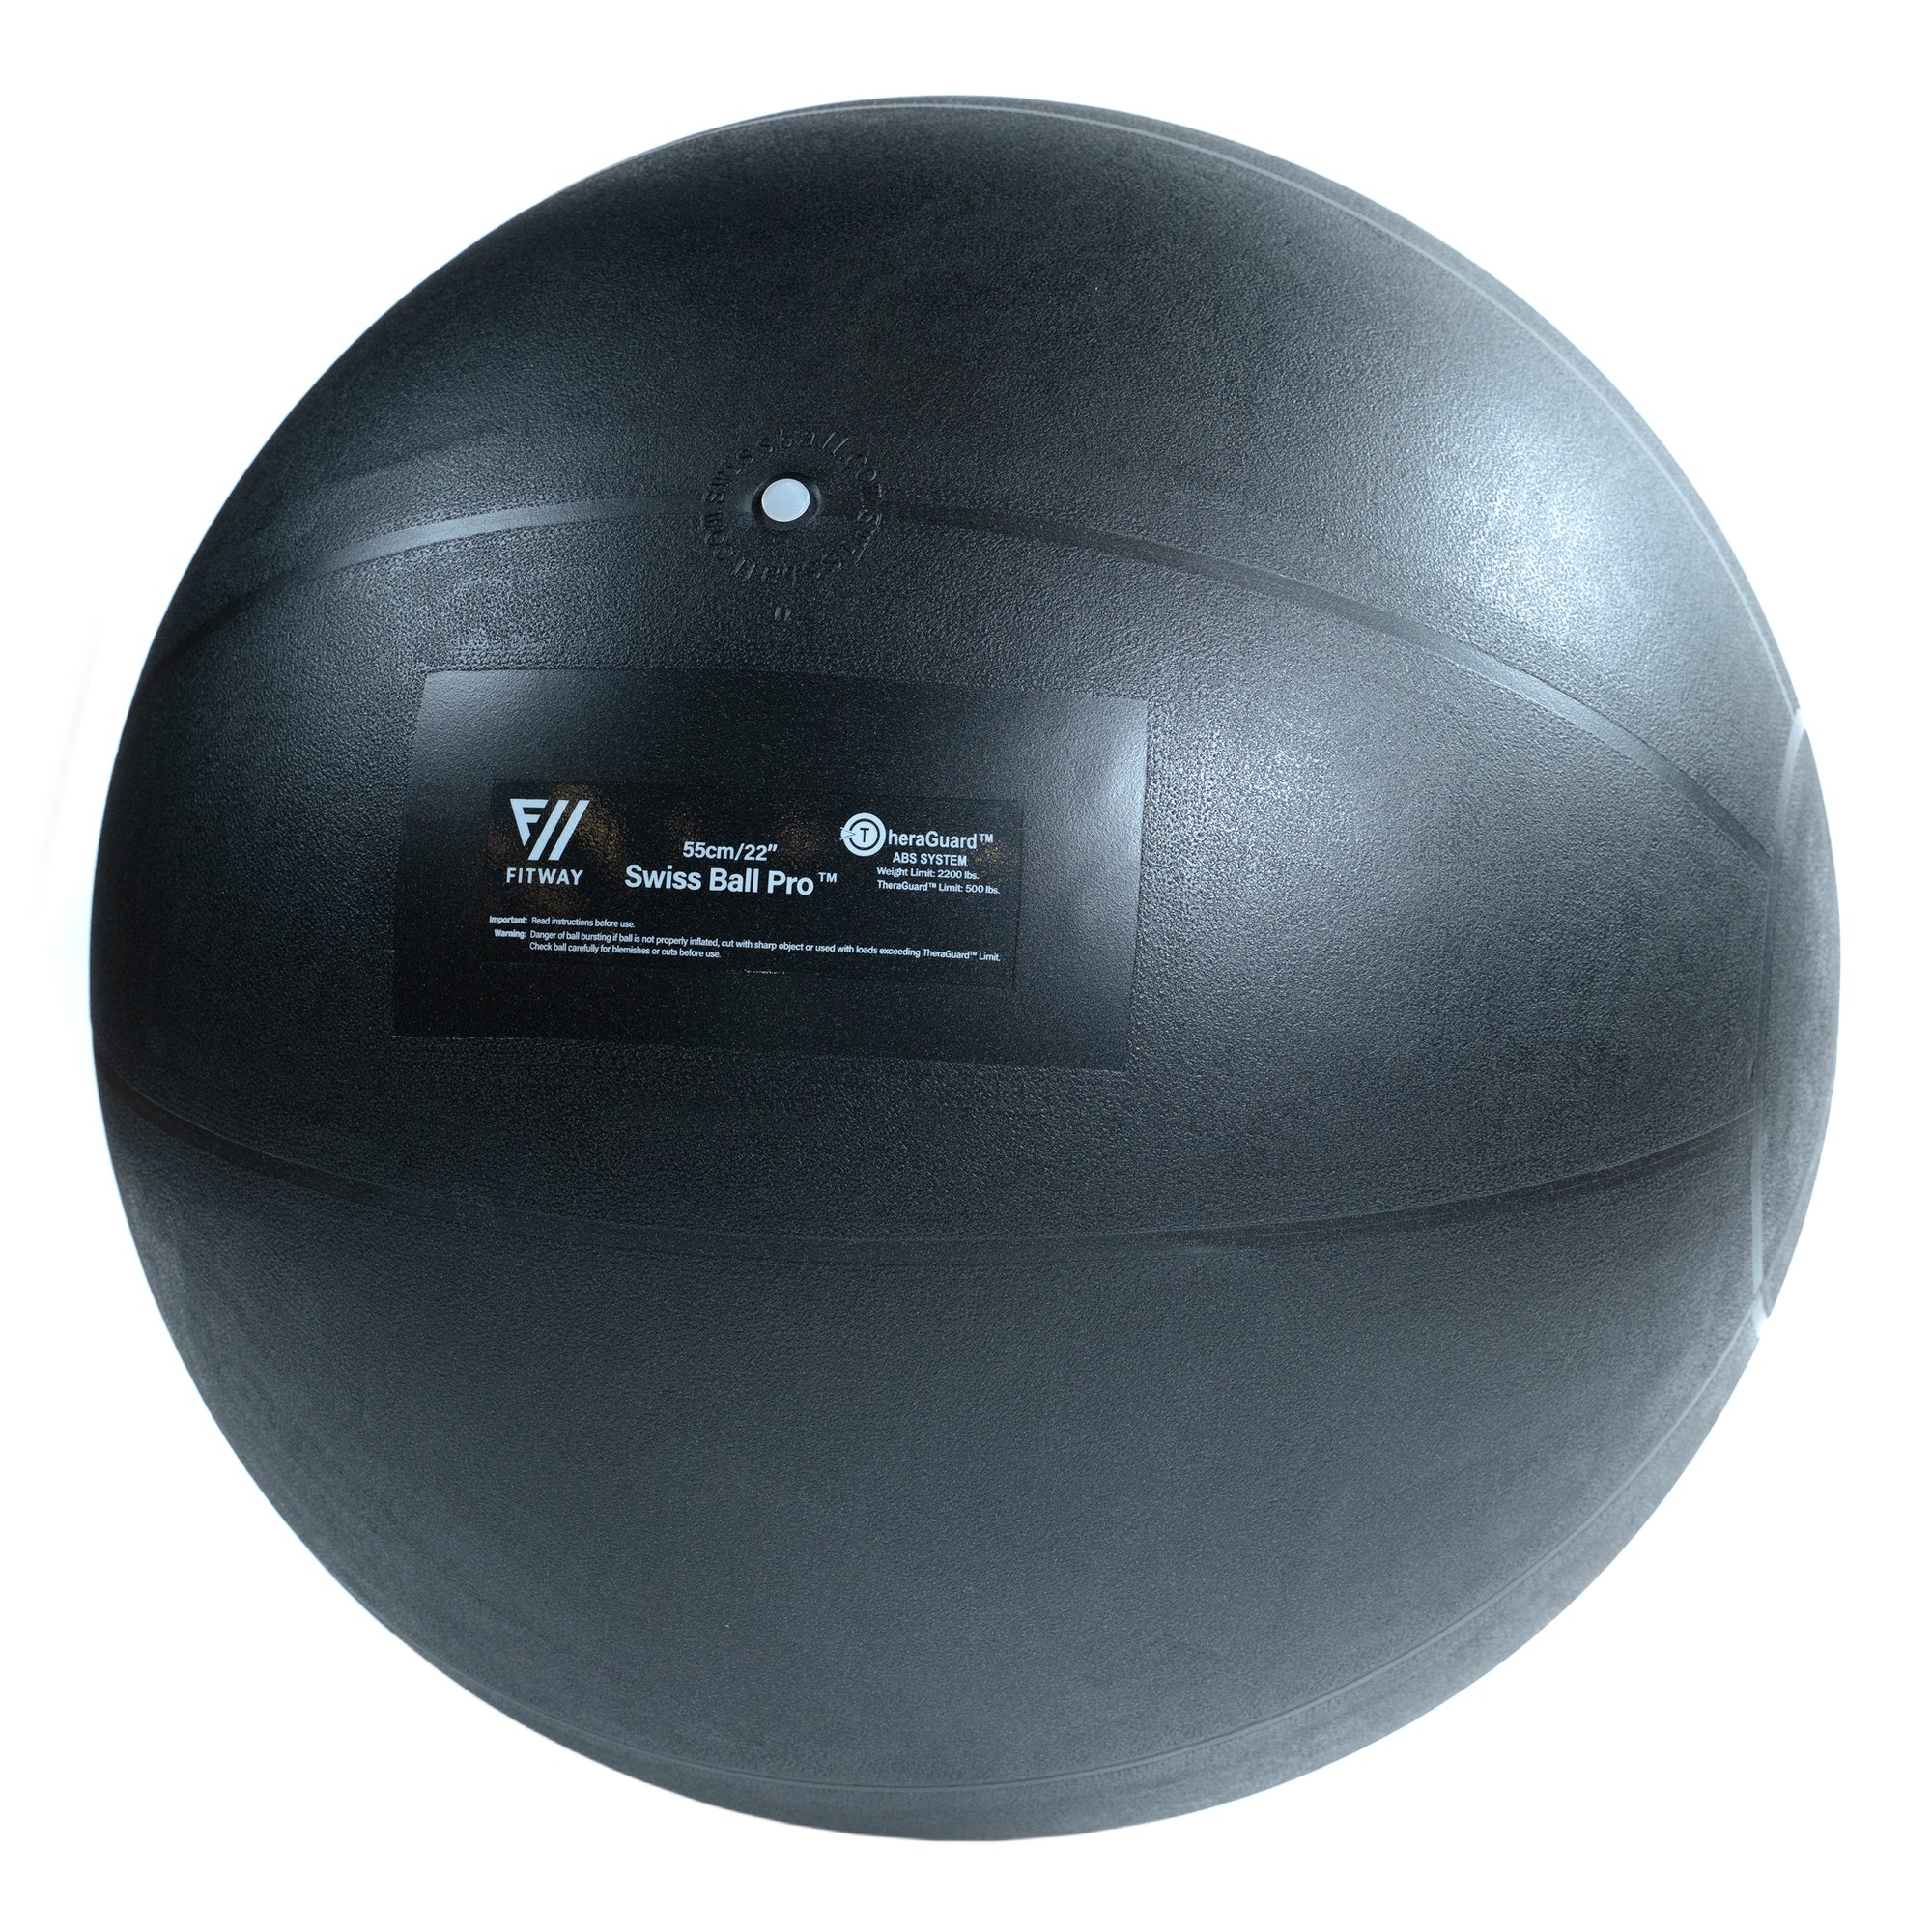 FitWay Equip. 55cm Stability Ball 